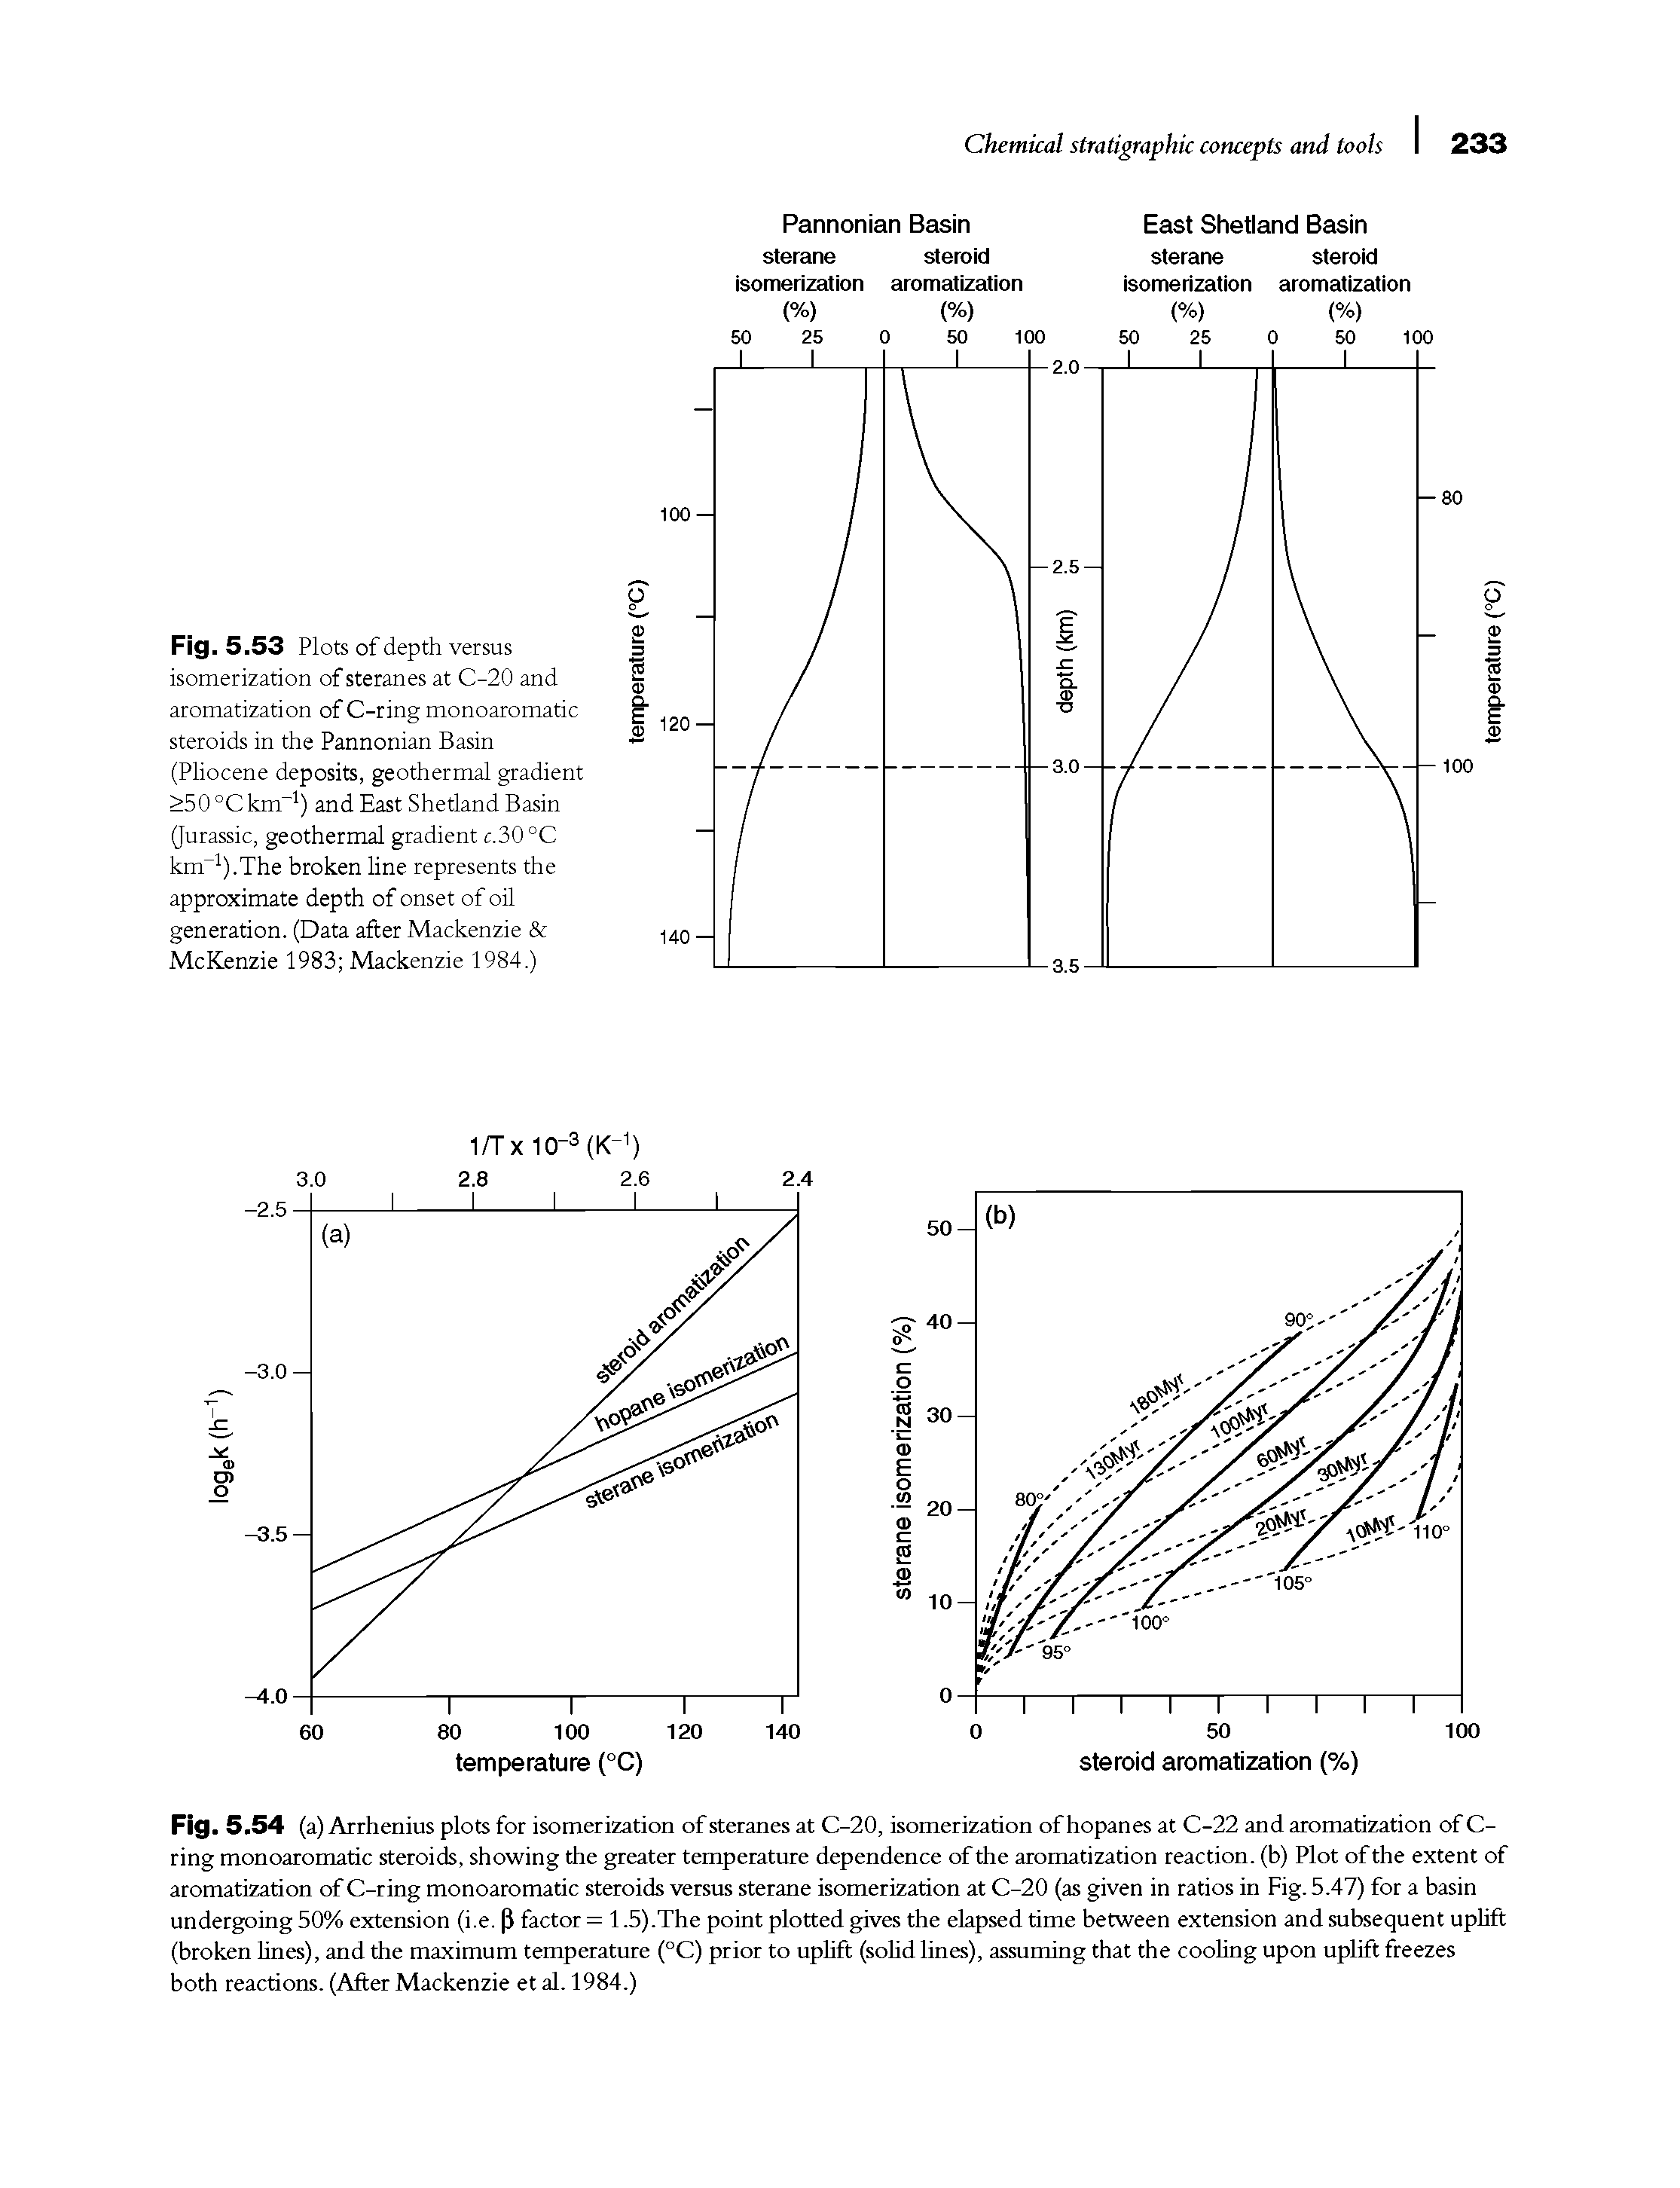 Fig. 5.53 Plots of depth versus isomerization of steranes at C-20 and aromatization of C-ring monoaromatic steroids in the Pannonian Basin (Pliocene deposits, geothermal gradient >50°Ckm-1) and East Shetland Basin (Jurassic, geothermal gradient c.30°C km-1).The broken line represents the approximate depth of onset of oil generation. (Data after Mackenzie McKenzie 1983 Mackenzie 1984.)...